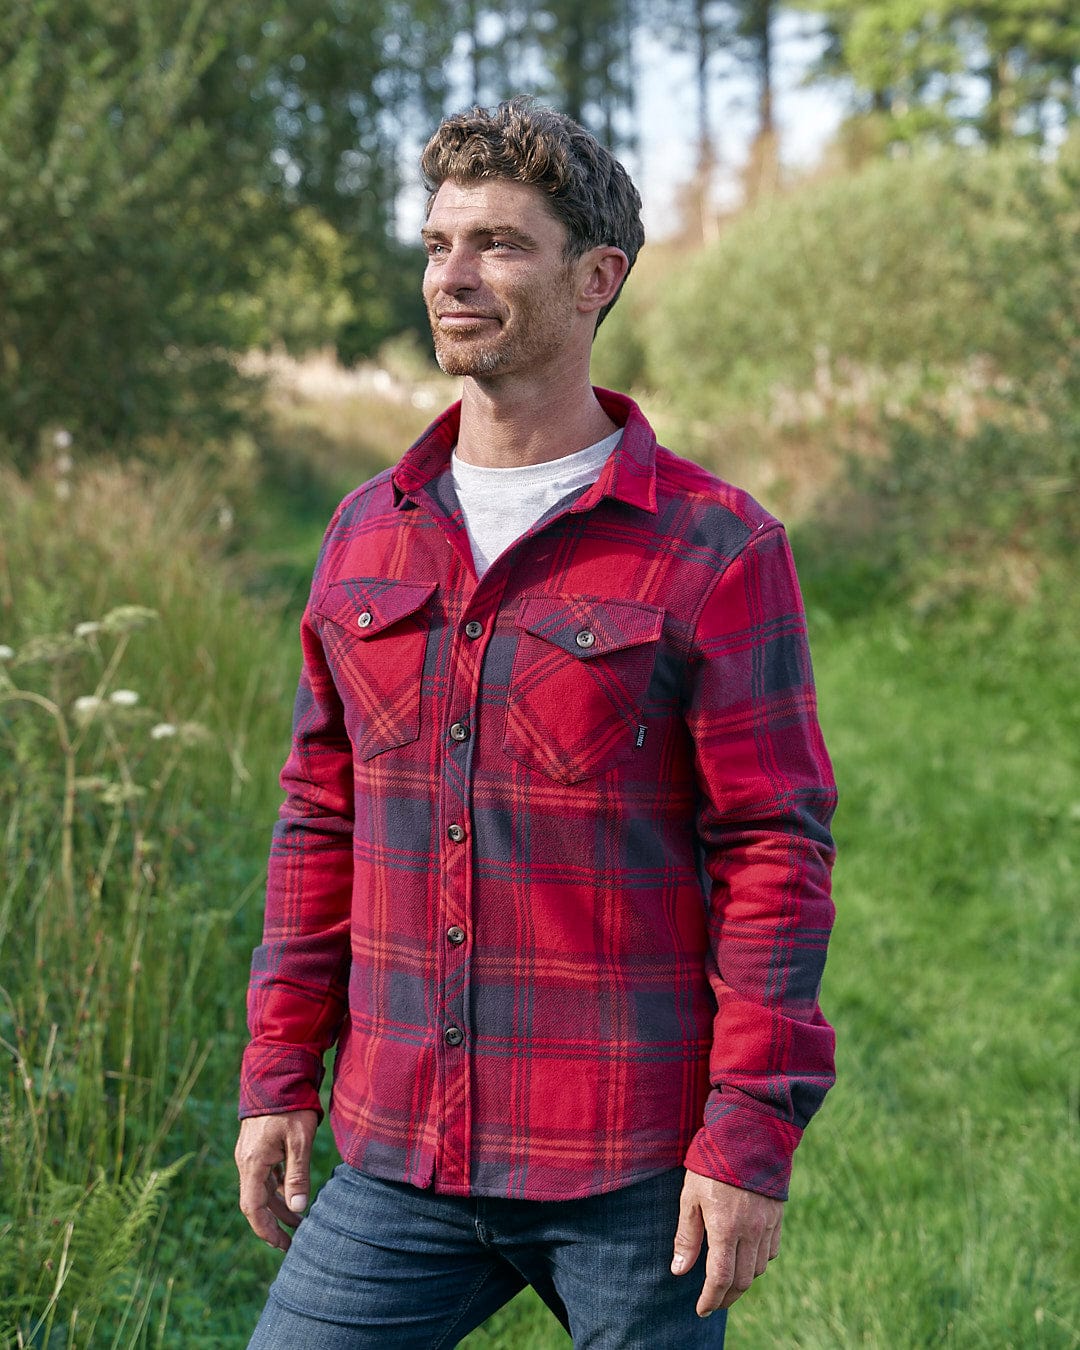 A man wearing a Saltrock Colter - Mens Hooded Shirt - Red standing in a field.